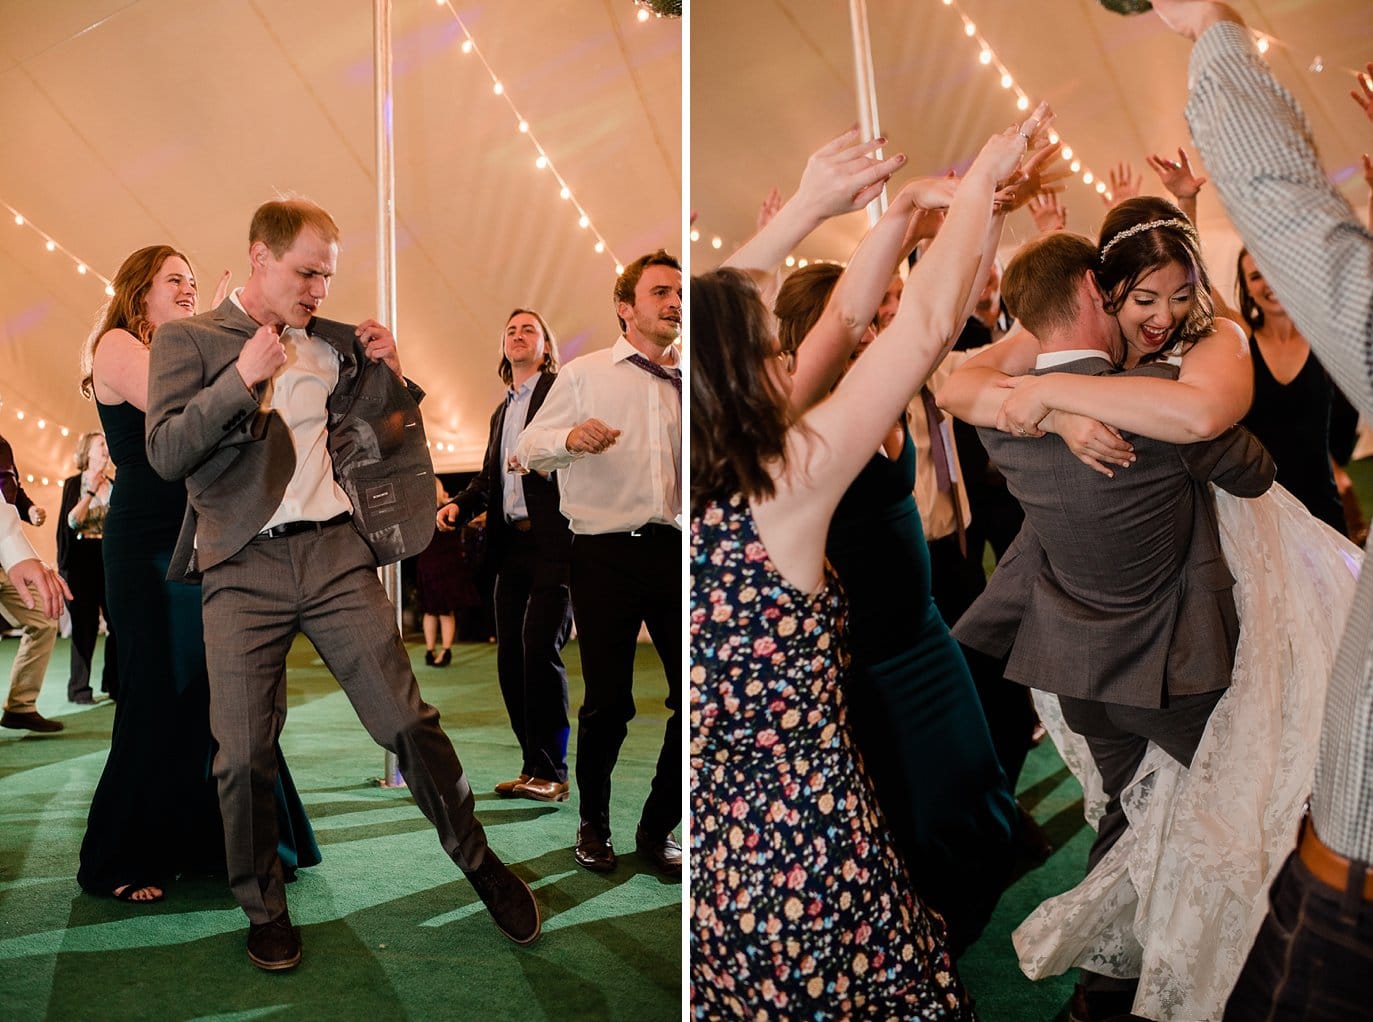 epic dance party at mountain wedding at B Lazy 2 Ranch by Fraser wedding photographer Jennie Crate